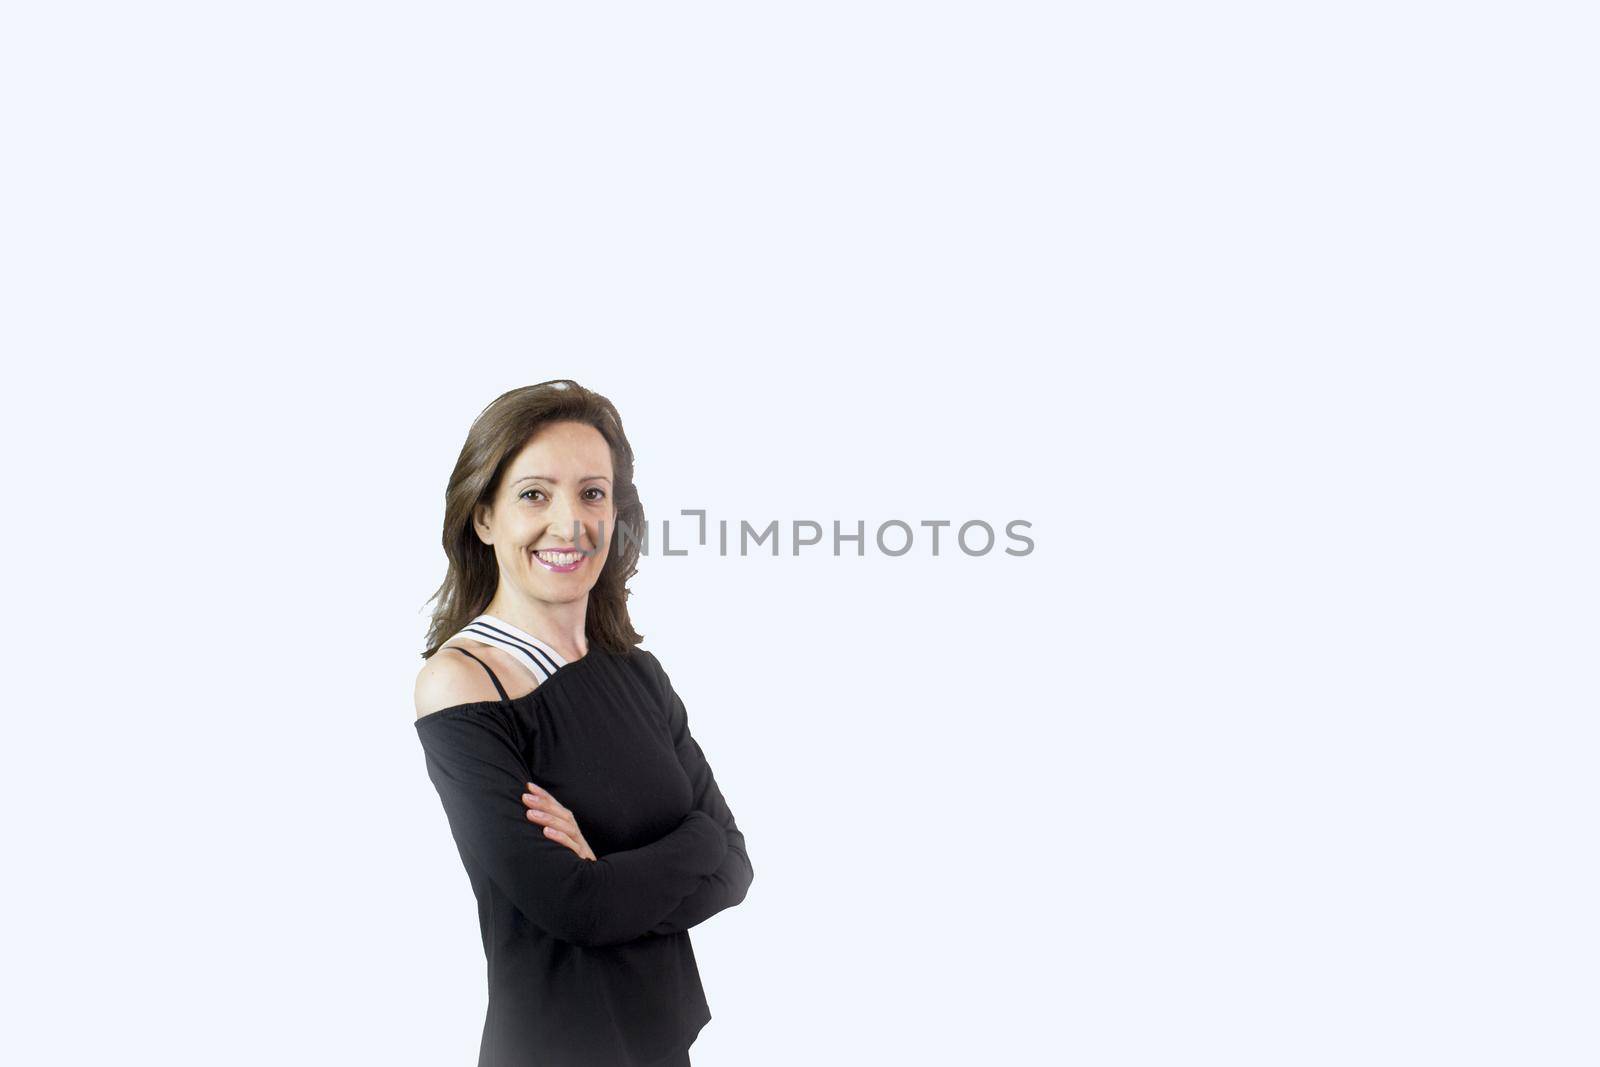 Forty year old woman with happy, joyful and positive expression by GemaIbarra